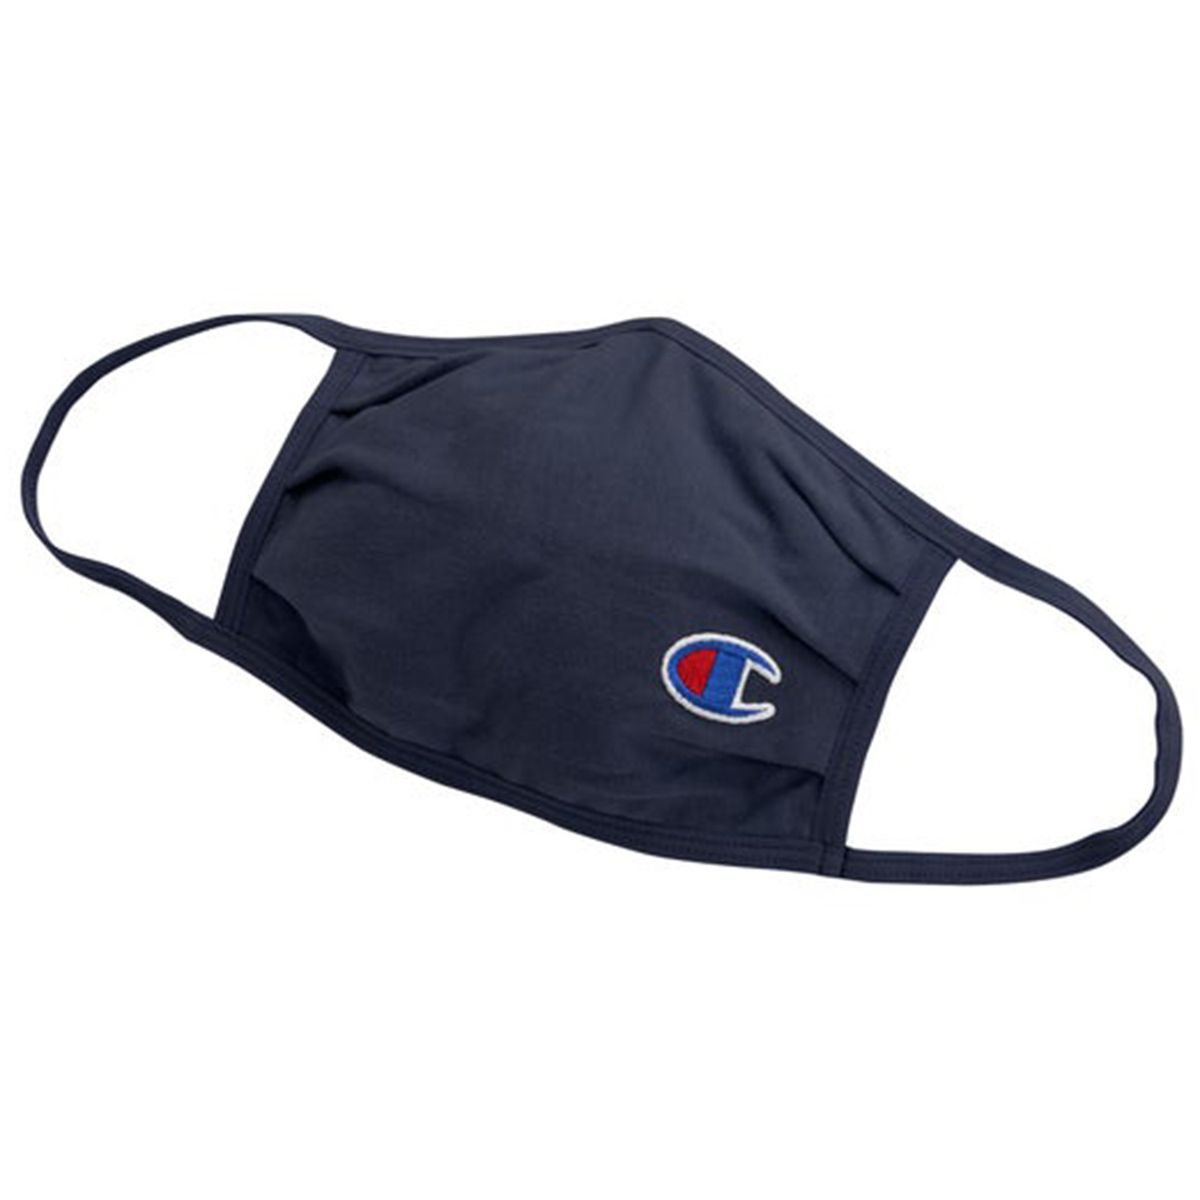 CHAMPION Cotton Wicking Face Mask